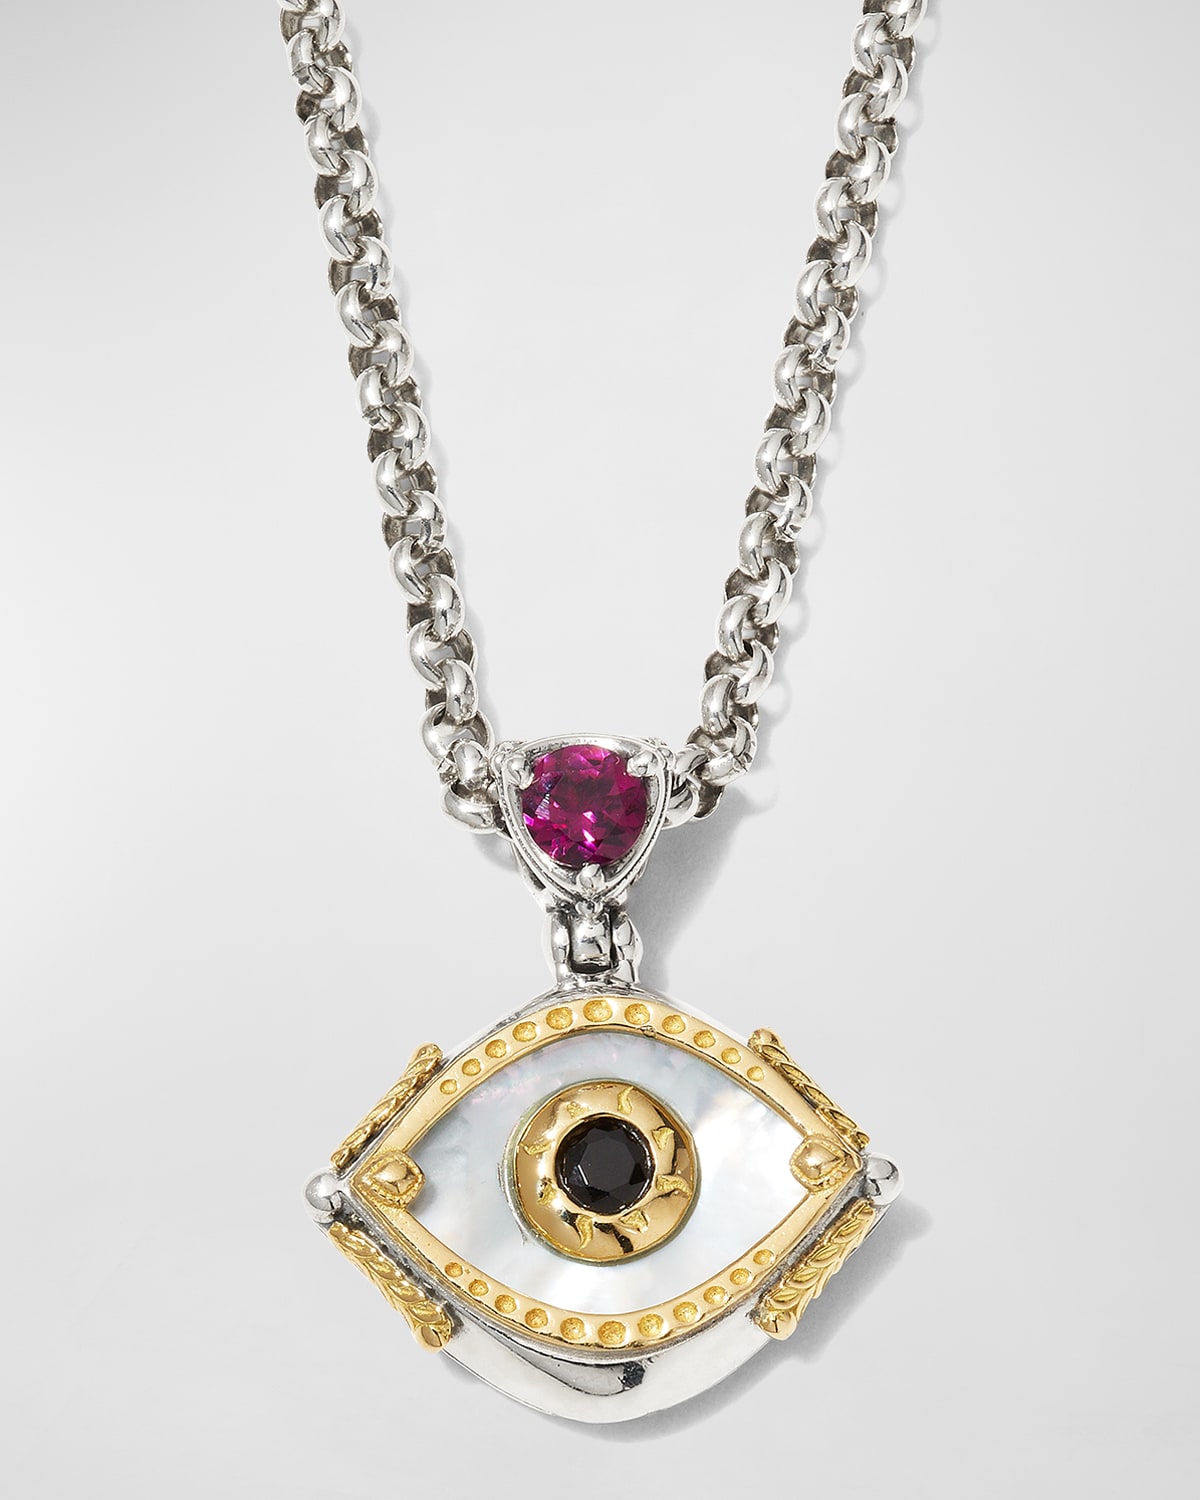 KONSTANTINO EVIL EYE MOTHER-OF-PEARL PENDANT NECKLACE WITH RHODOLITE AND BLACK SPINEL